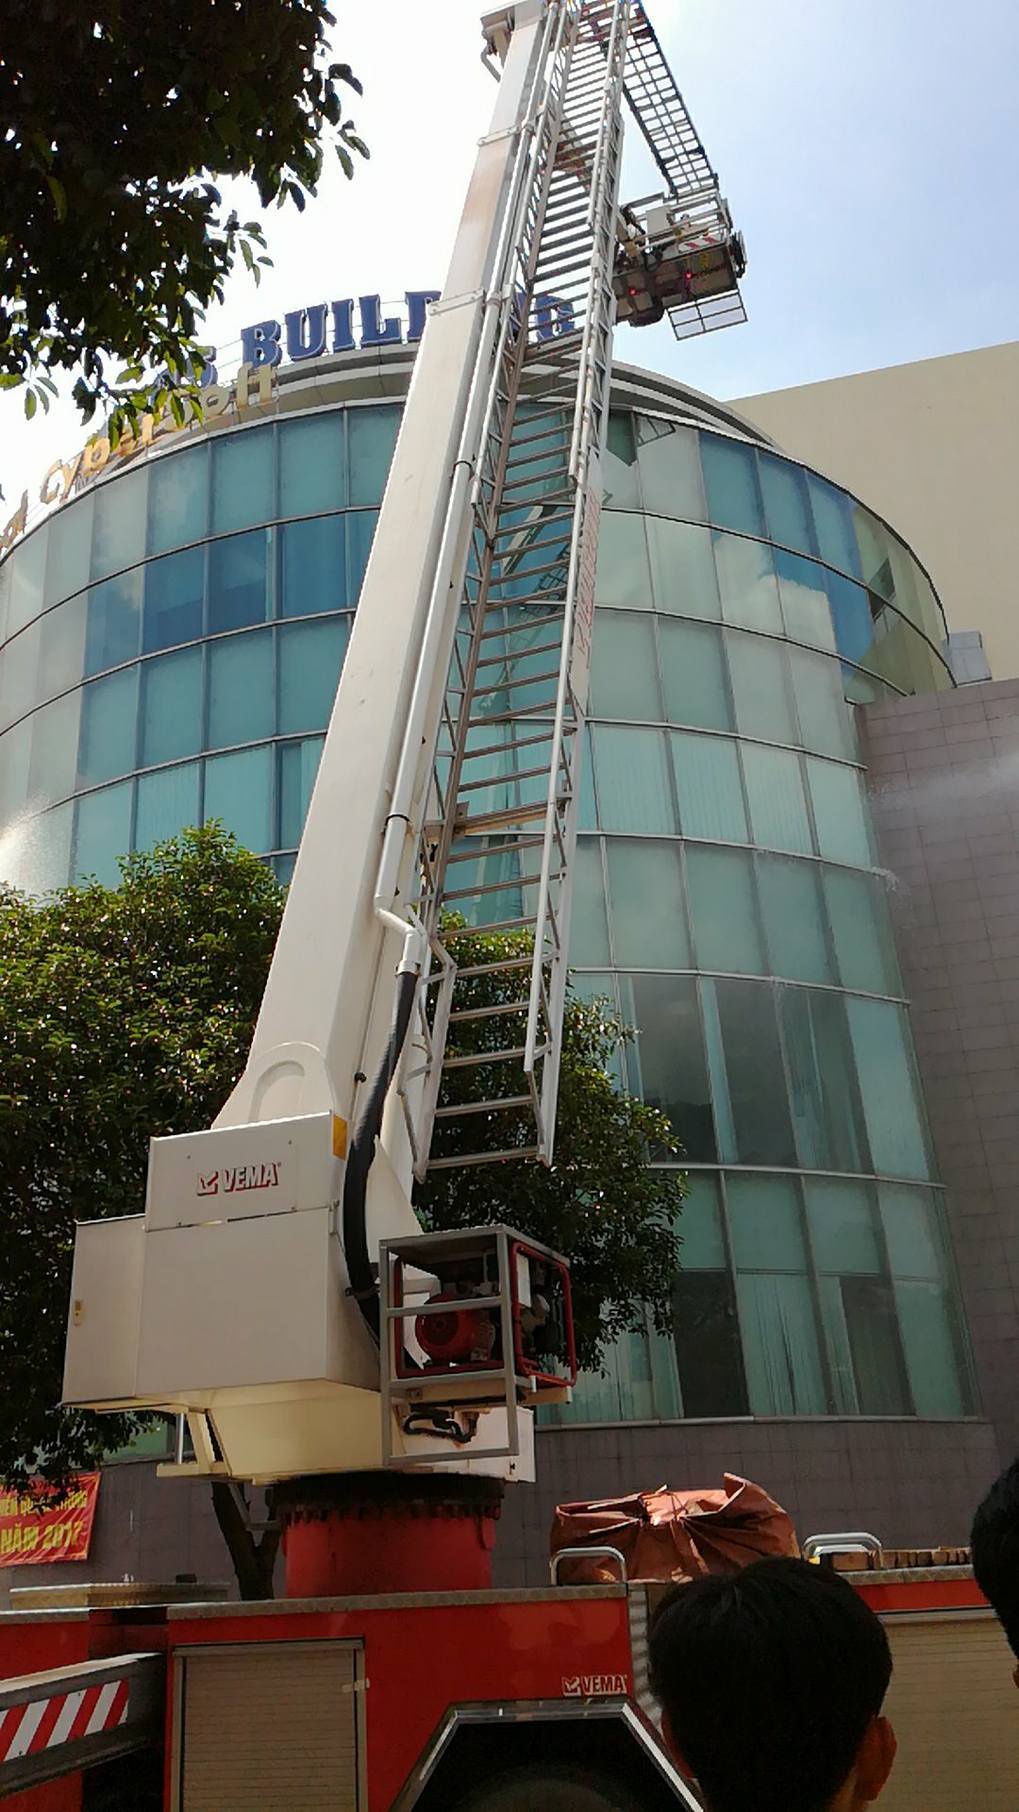 Using crane trucks to approach windows of the building’s top floor to save staffs safely